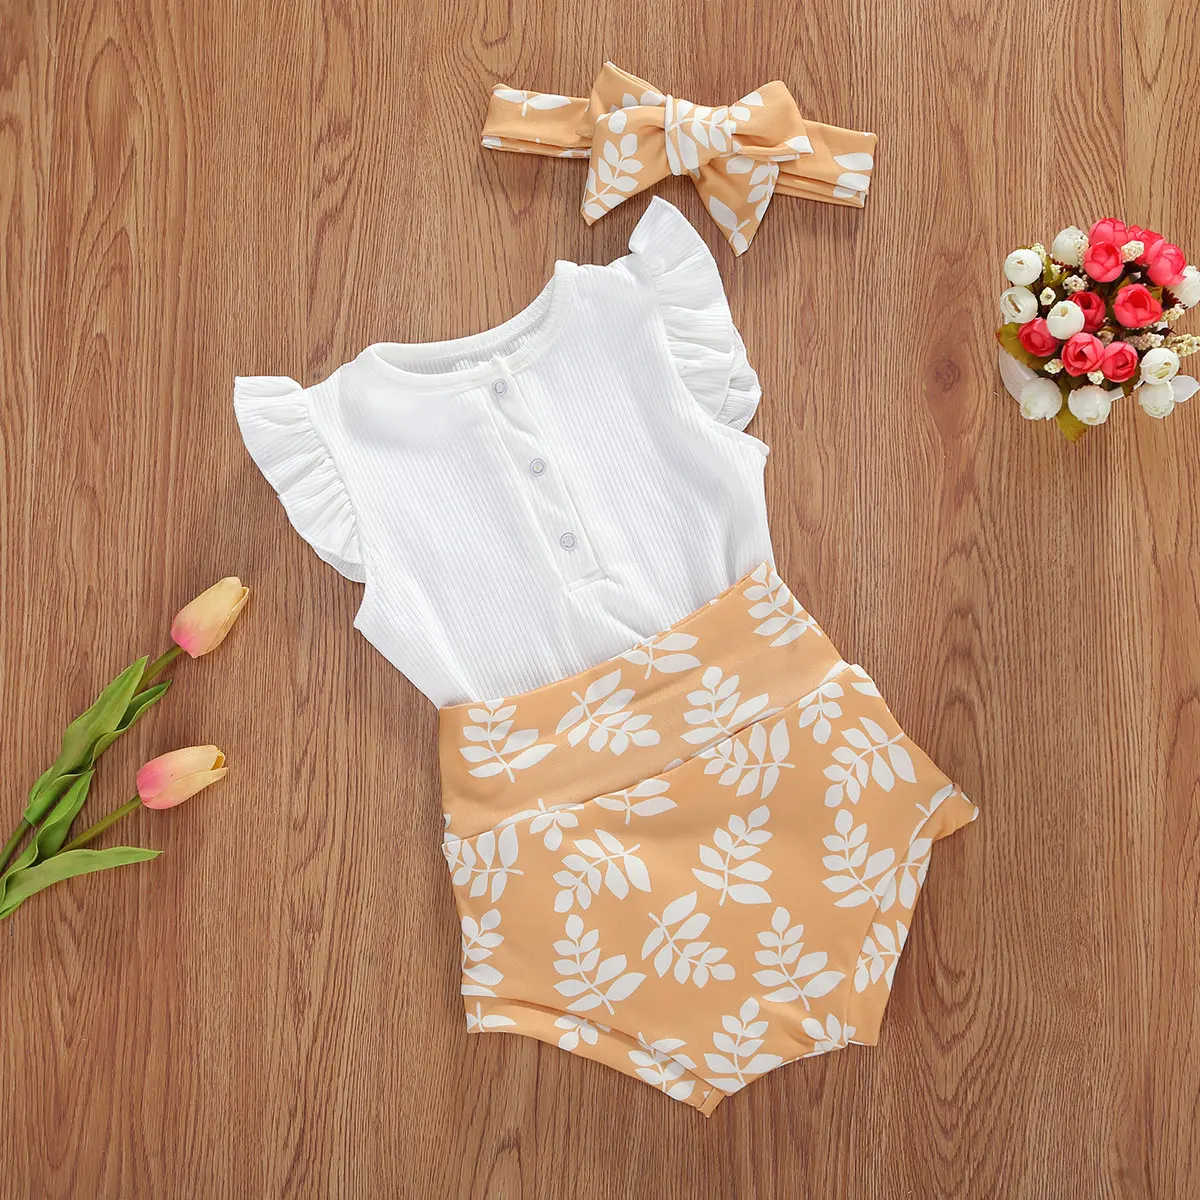 baby clothes penguin set Baby Girl Floral Clothes Sets Summer Baby Girls Ruffles Short Sleeve Romper Tops + Sun Flower Printed Shorts + Headband Outfits baby clothing set essentials